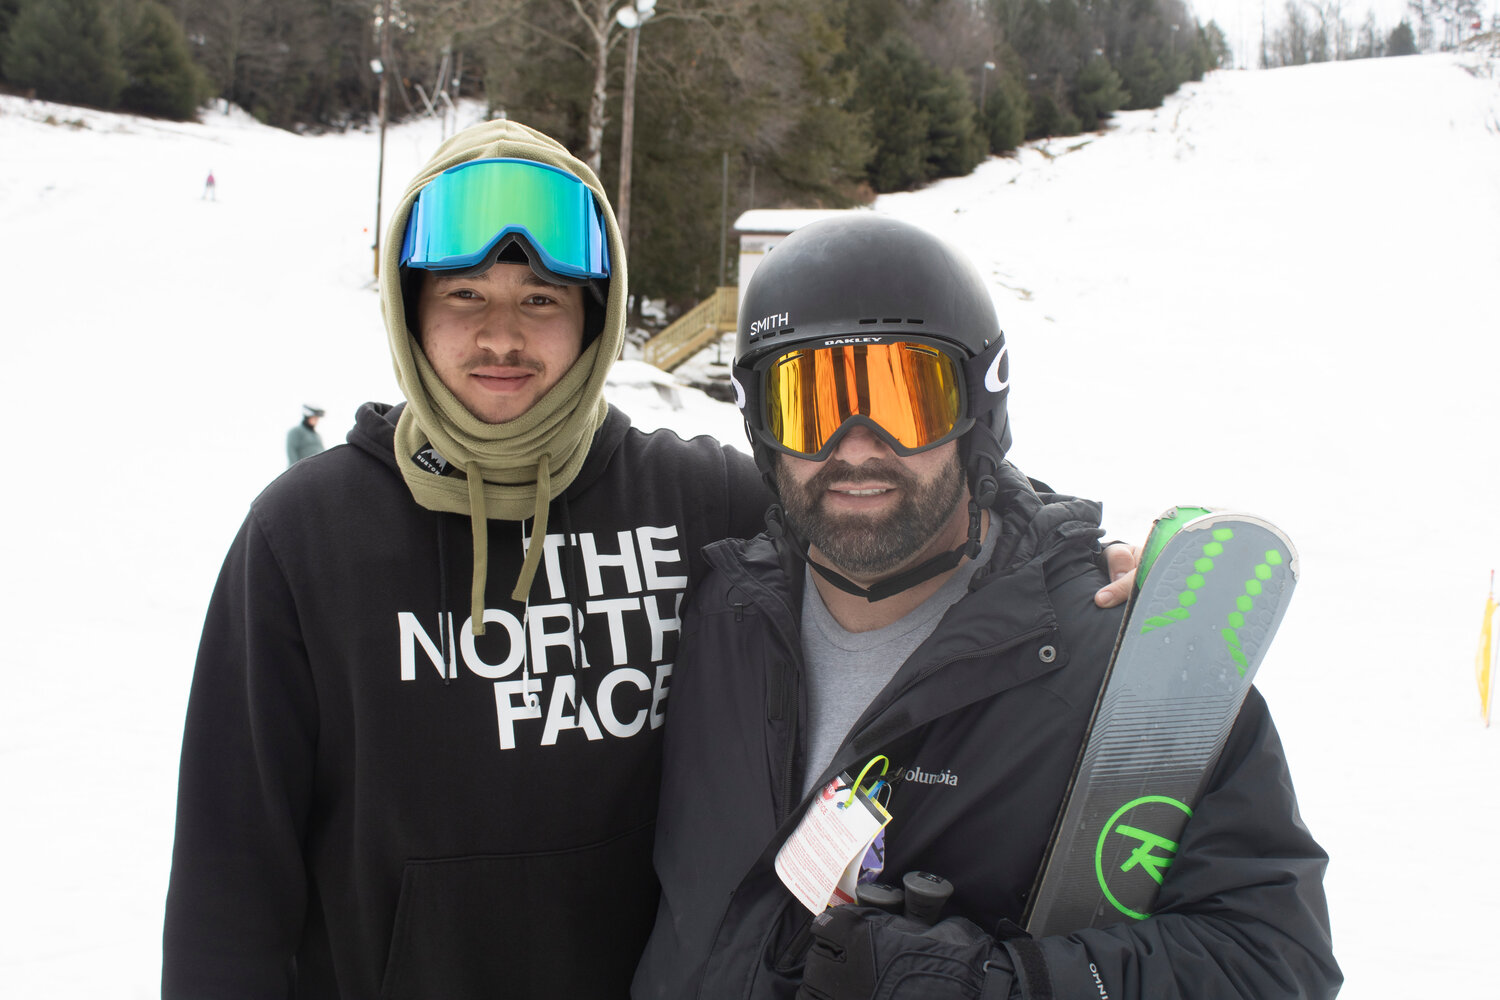 Joseph Stalter, right, and his son Matthew of Wurtsboro hit the slopes at Holiday Mtn. last Saturday.